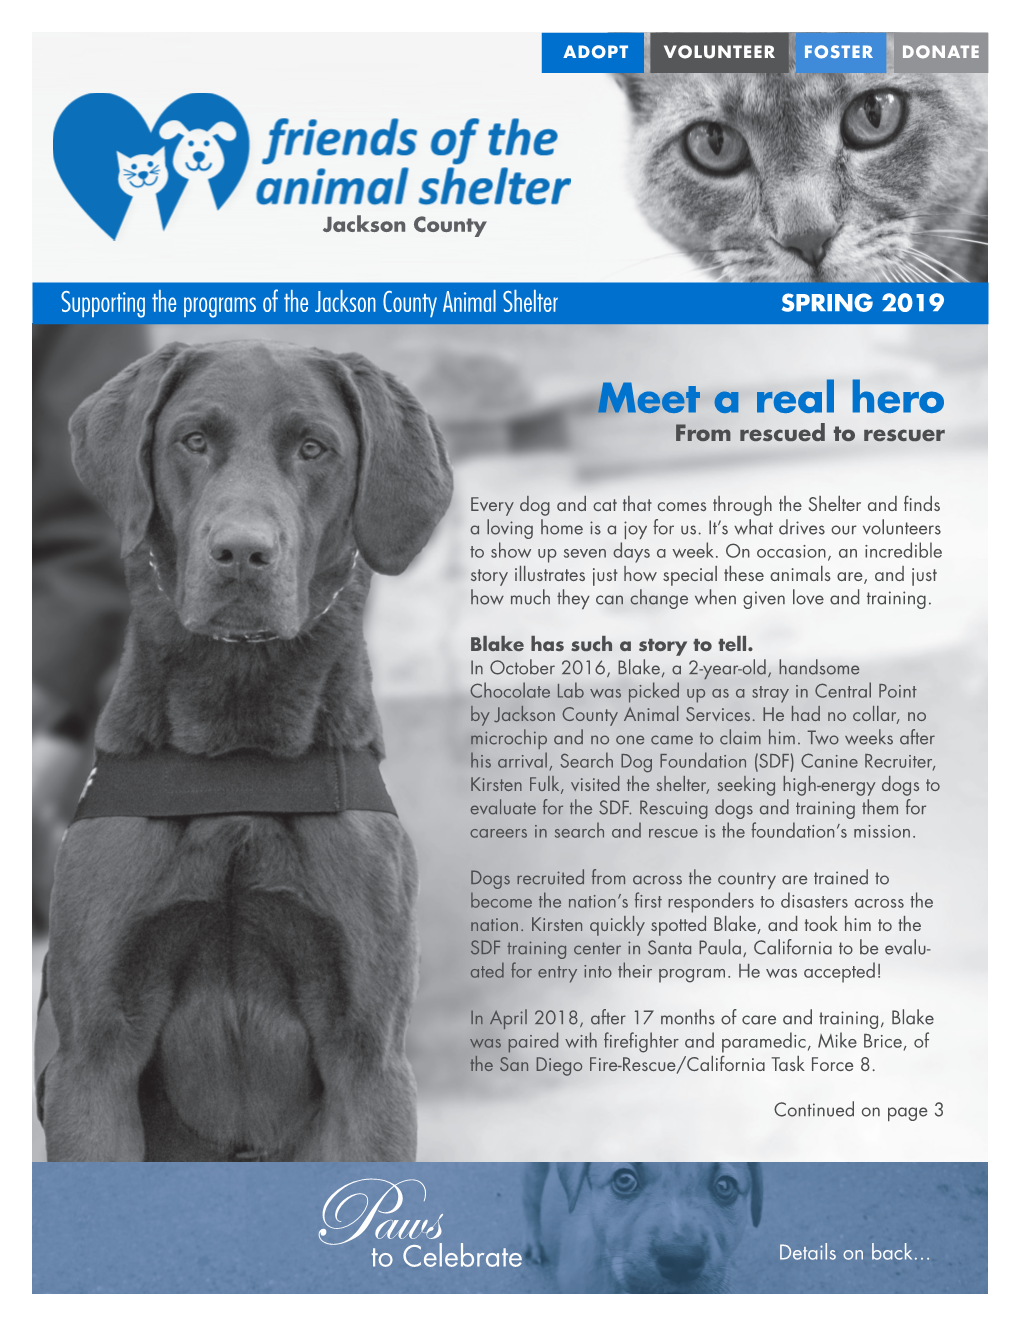 Meet a Real Hero from Rescued to Rescuer